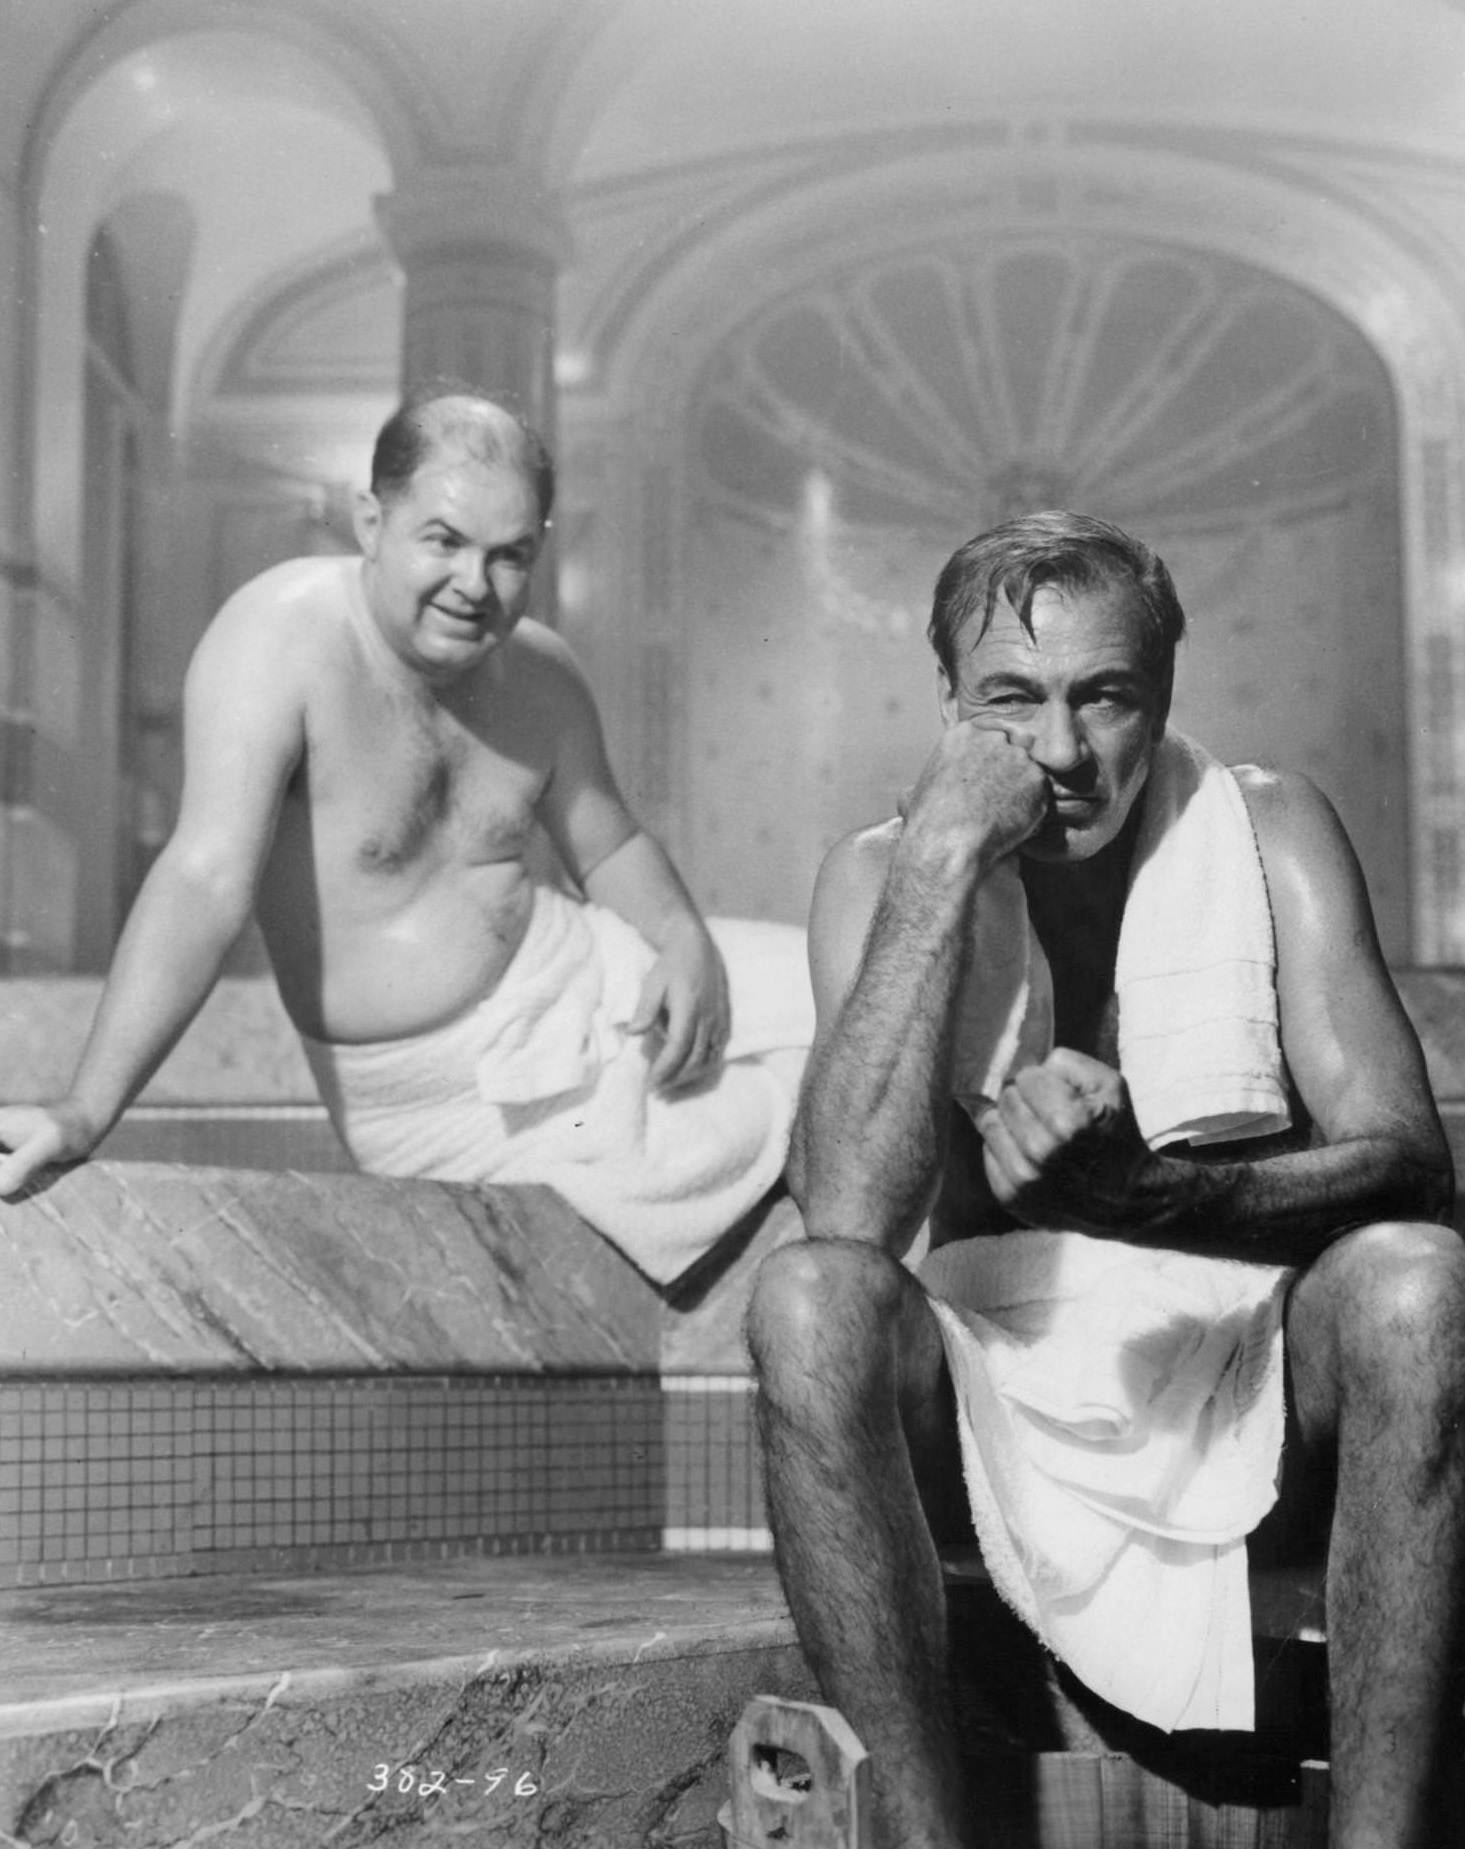 John McGiver and Gary Cooper in steam room in a scene from the film 'Love In The Afternoon', 1957.